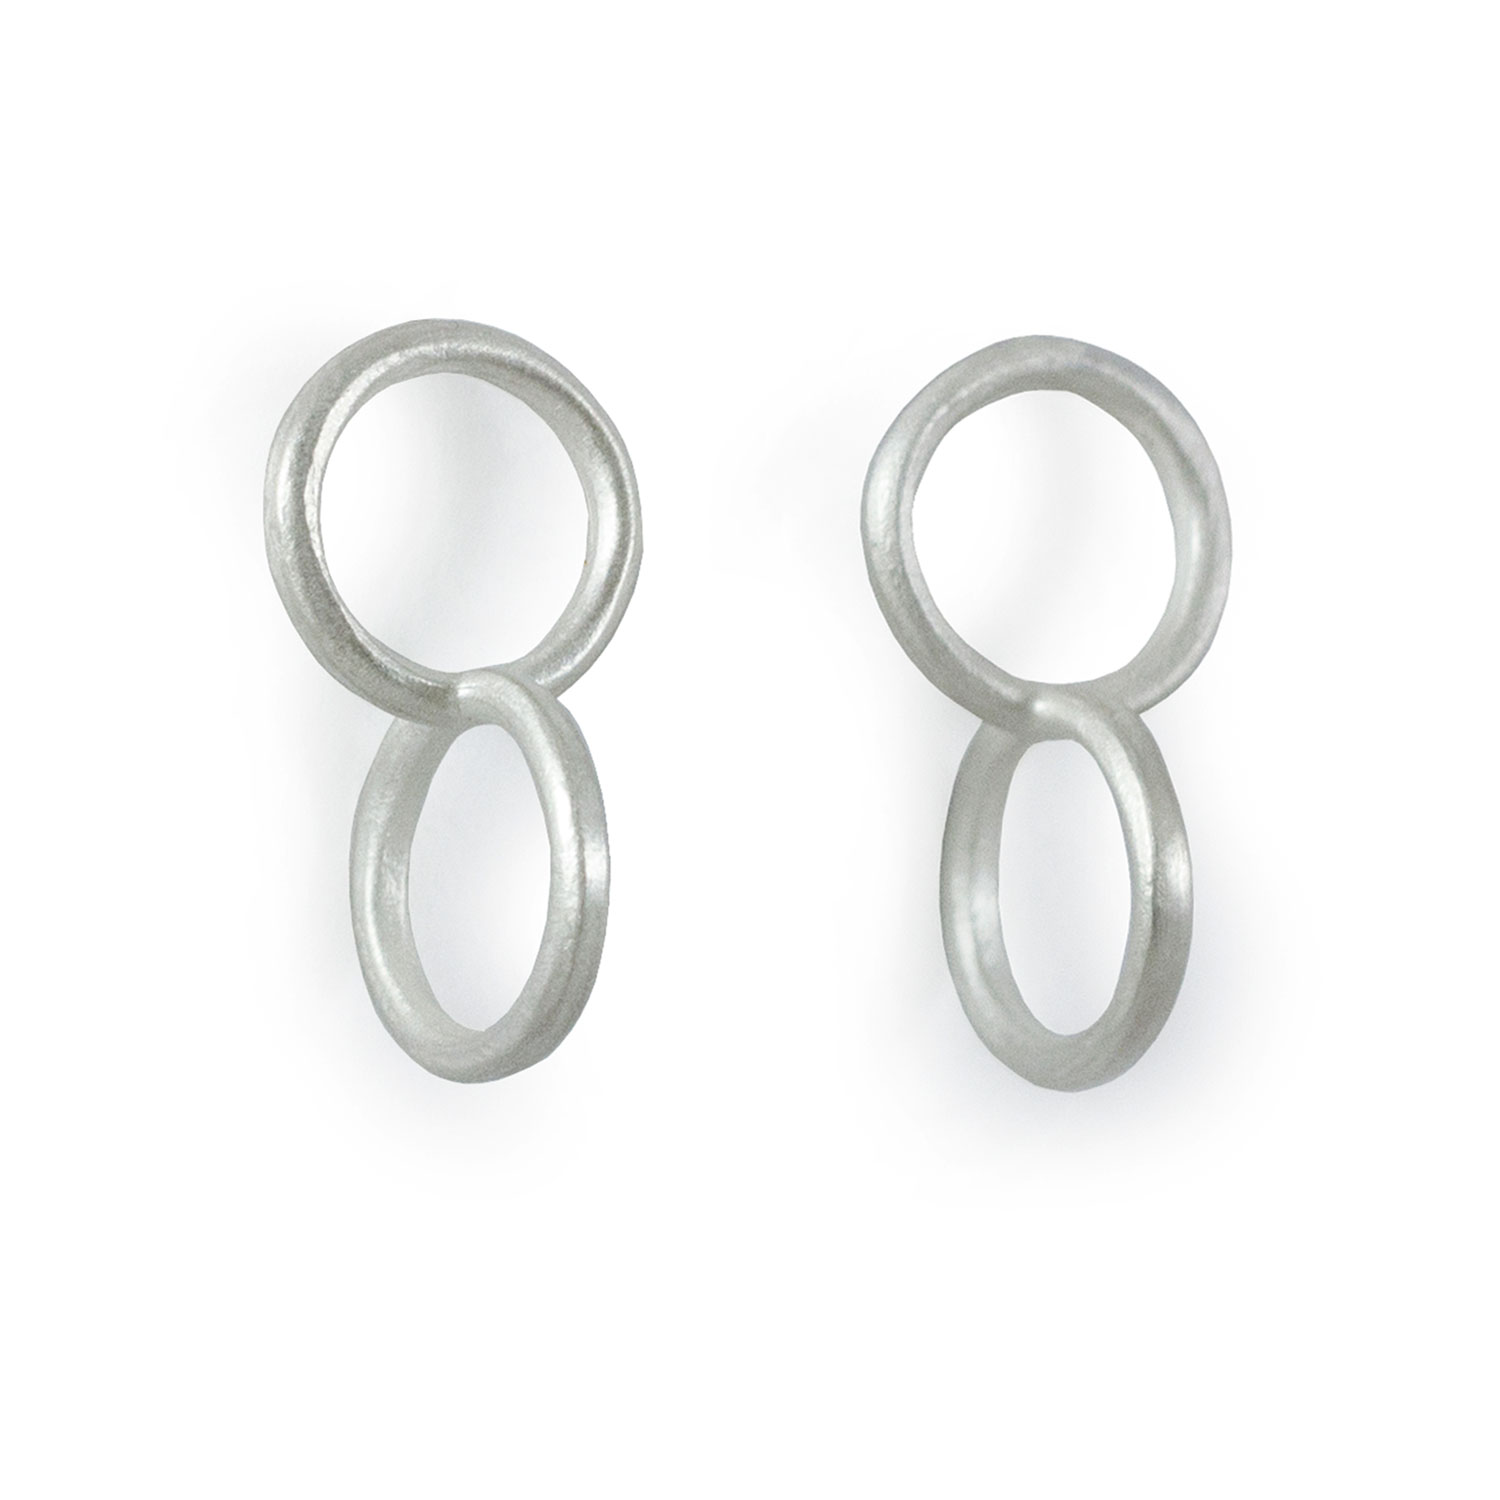 Contemporary Silver Or Gold Plated Dot Stud Earrings By Hurleyburley |  notonthehighstreet.com